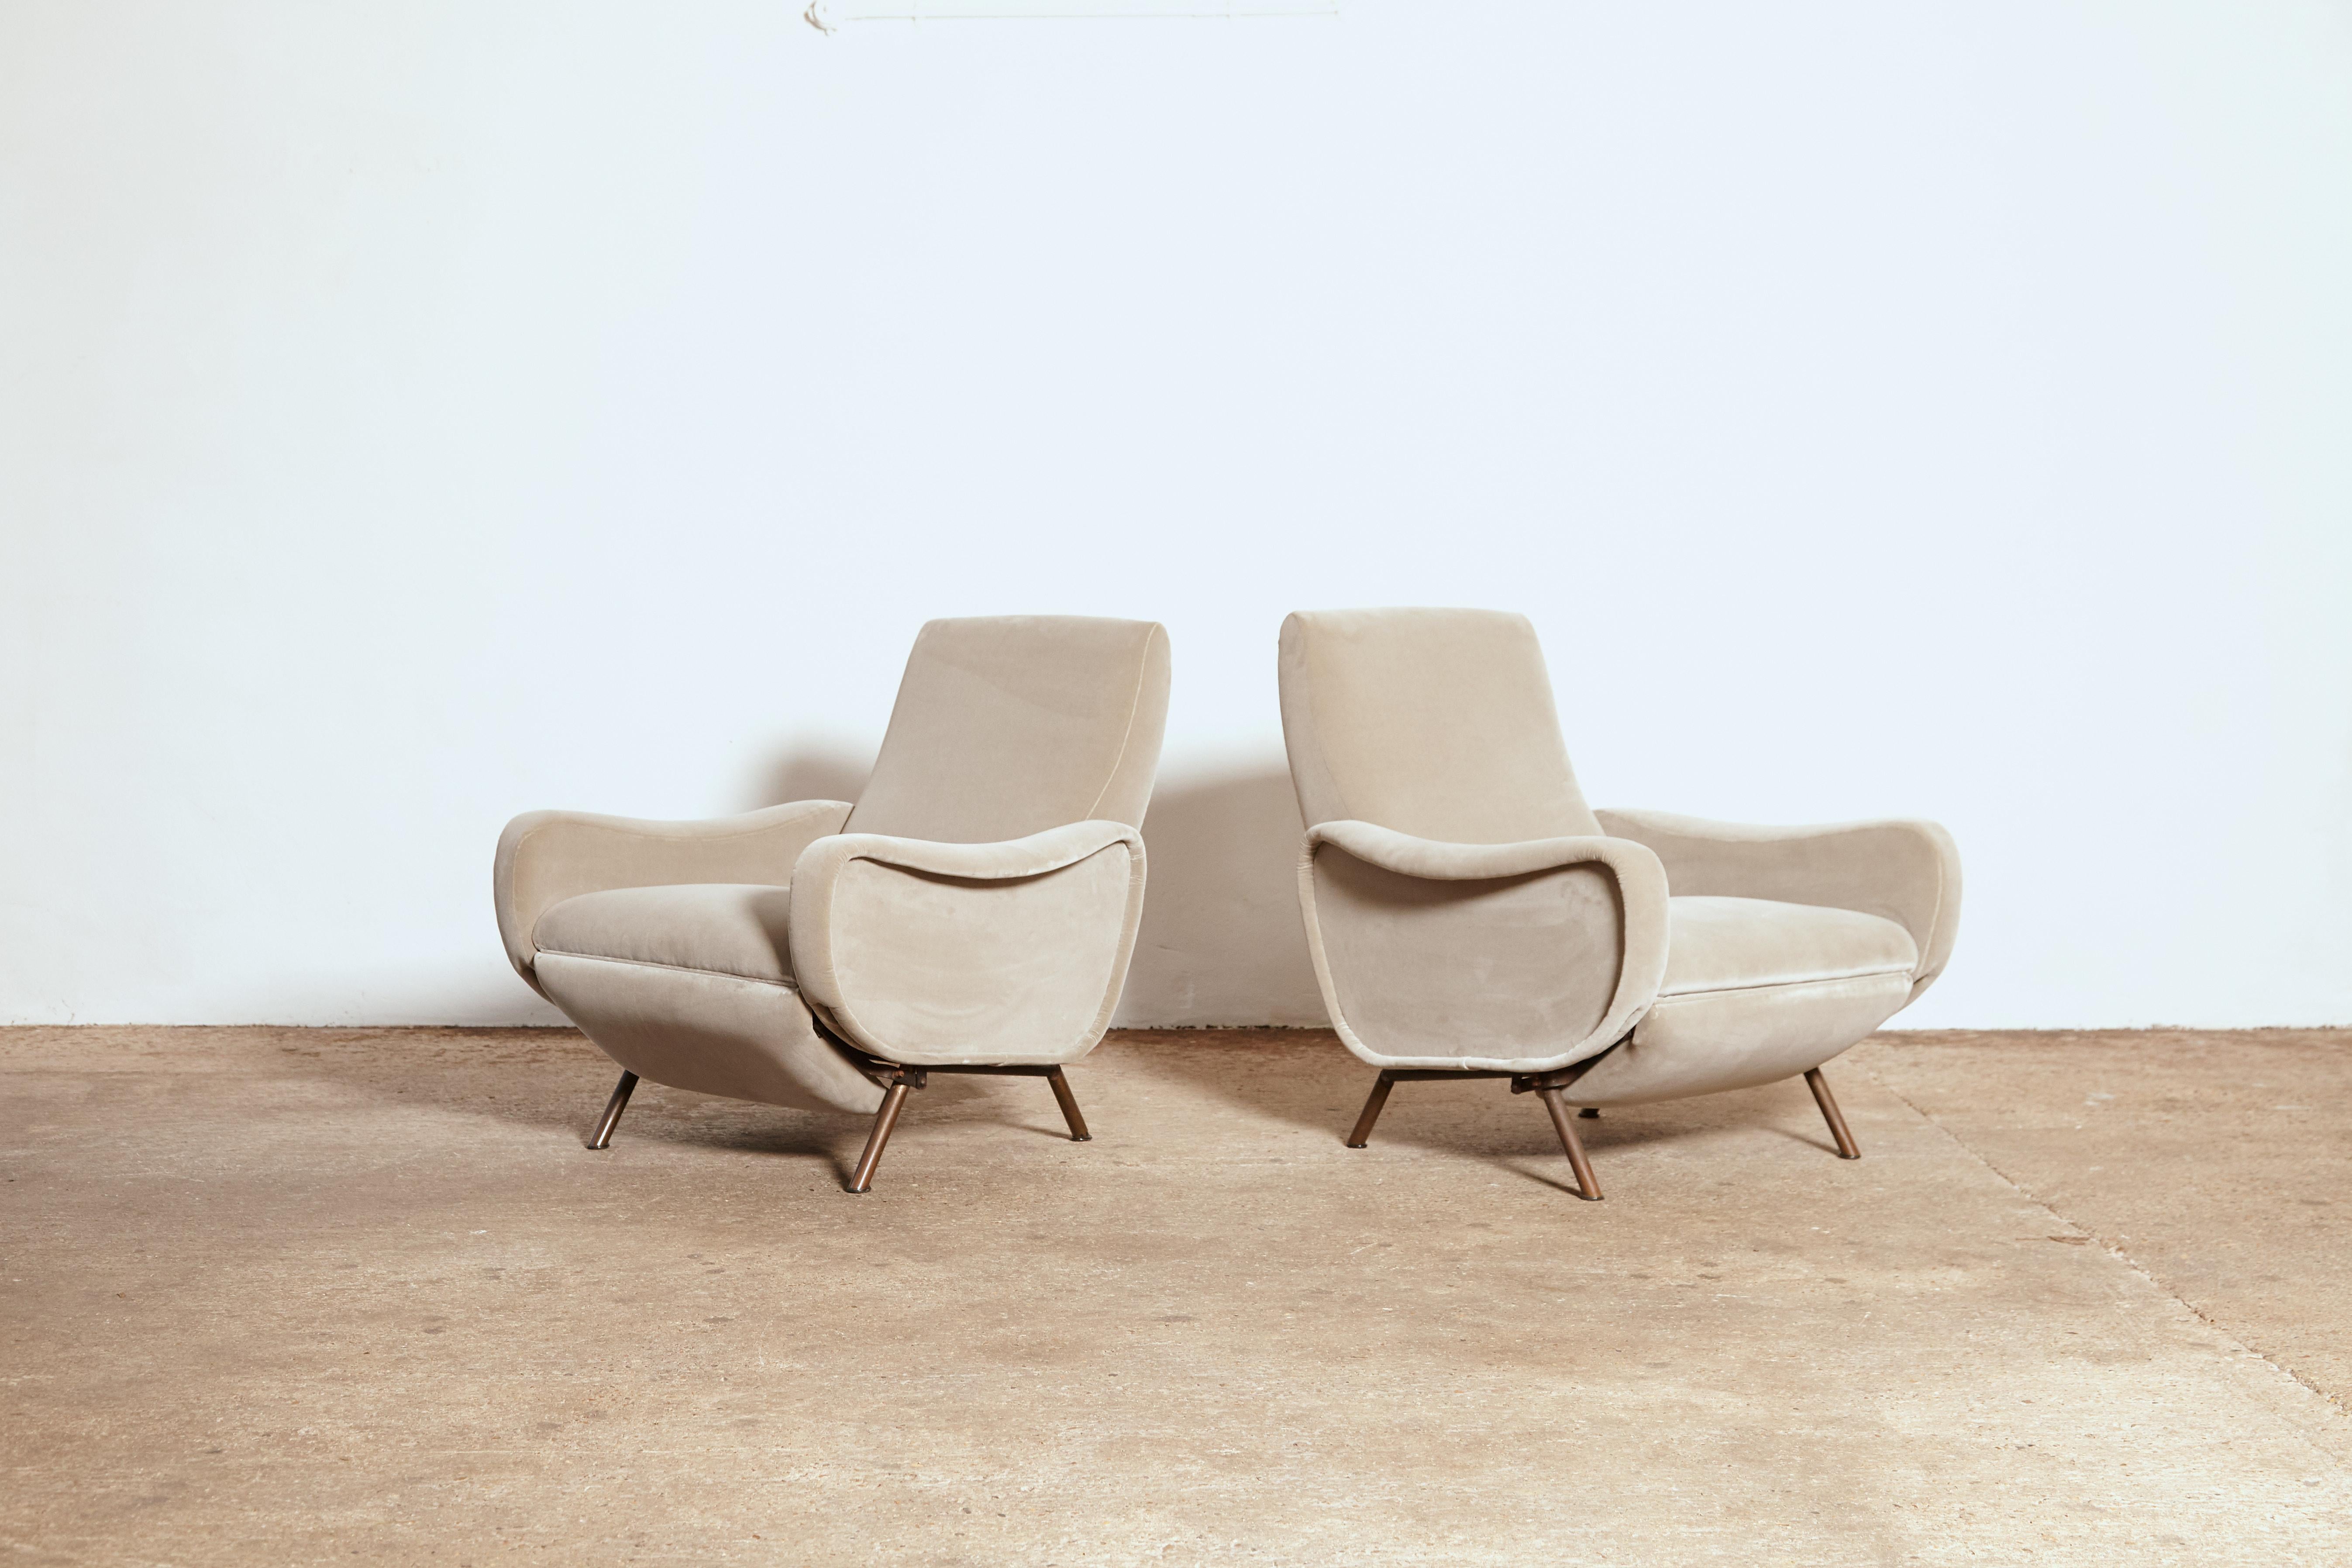 Italian Rare Marco Zanuso Reclining Lady Chairs, Italy, 1960s, reupholstered in COM